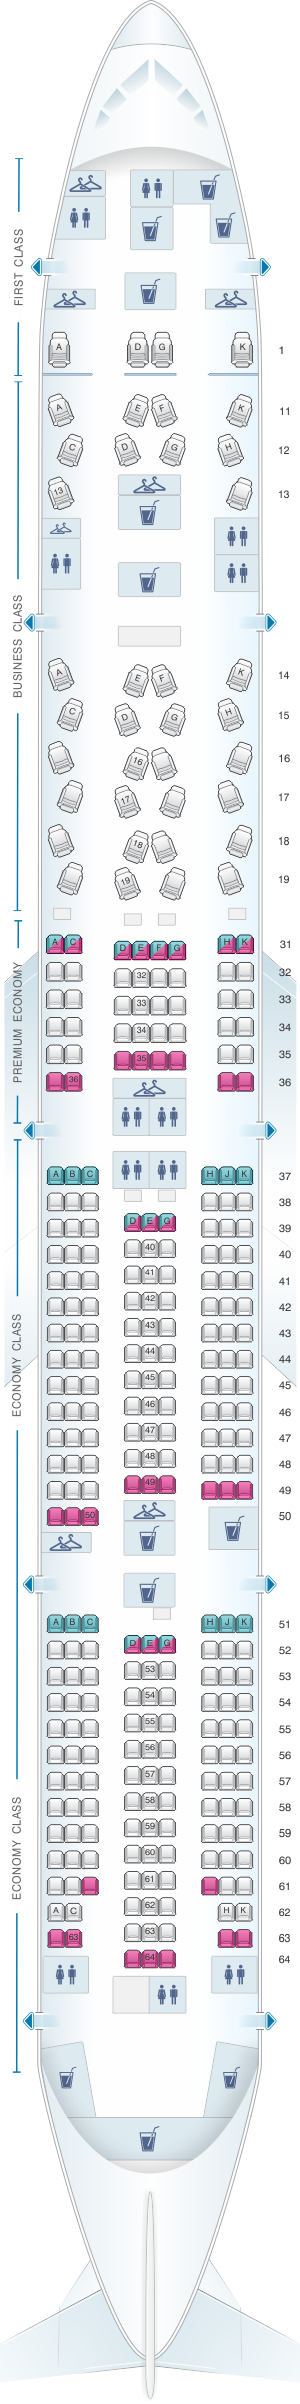 Seat map for China Southern Airlines Boeing B77W